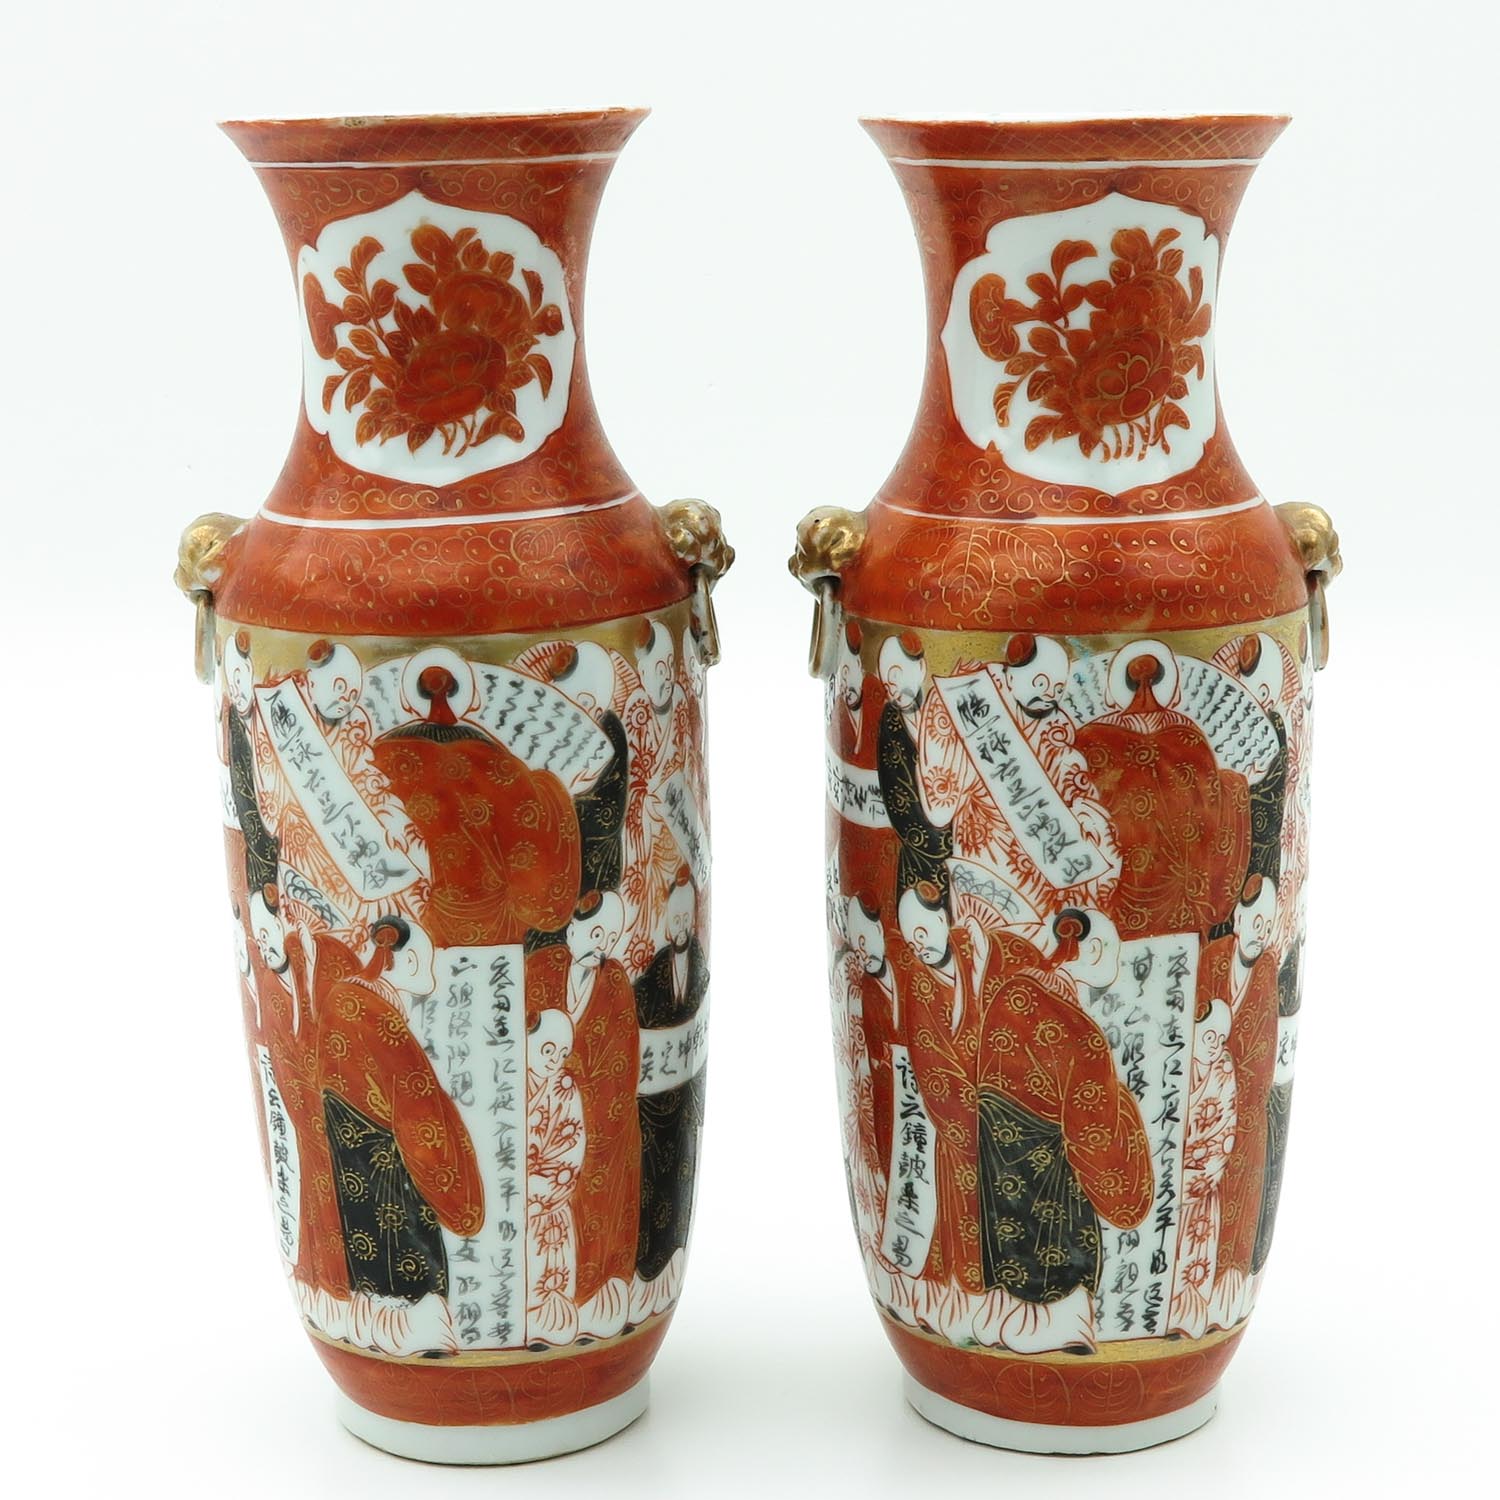 A Pair of Orange and Gilt Vases - Image 3 of 9